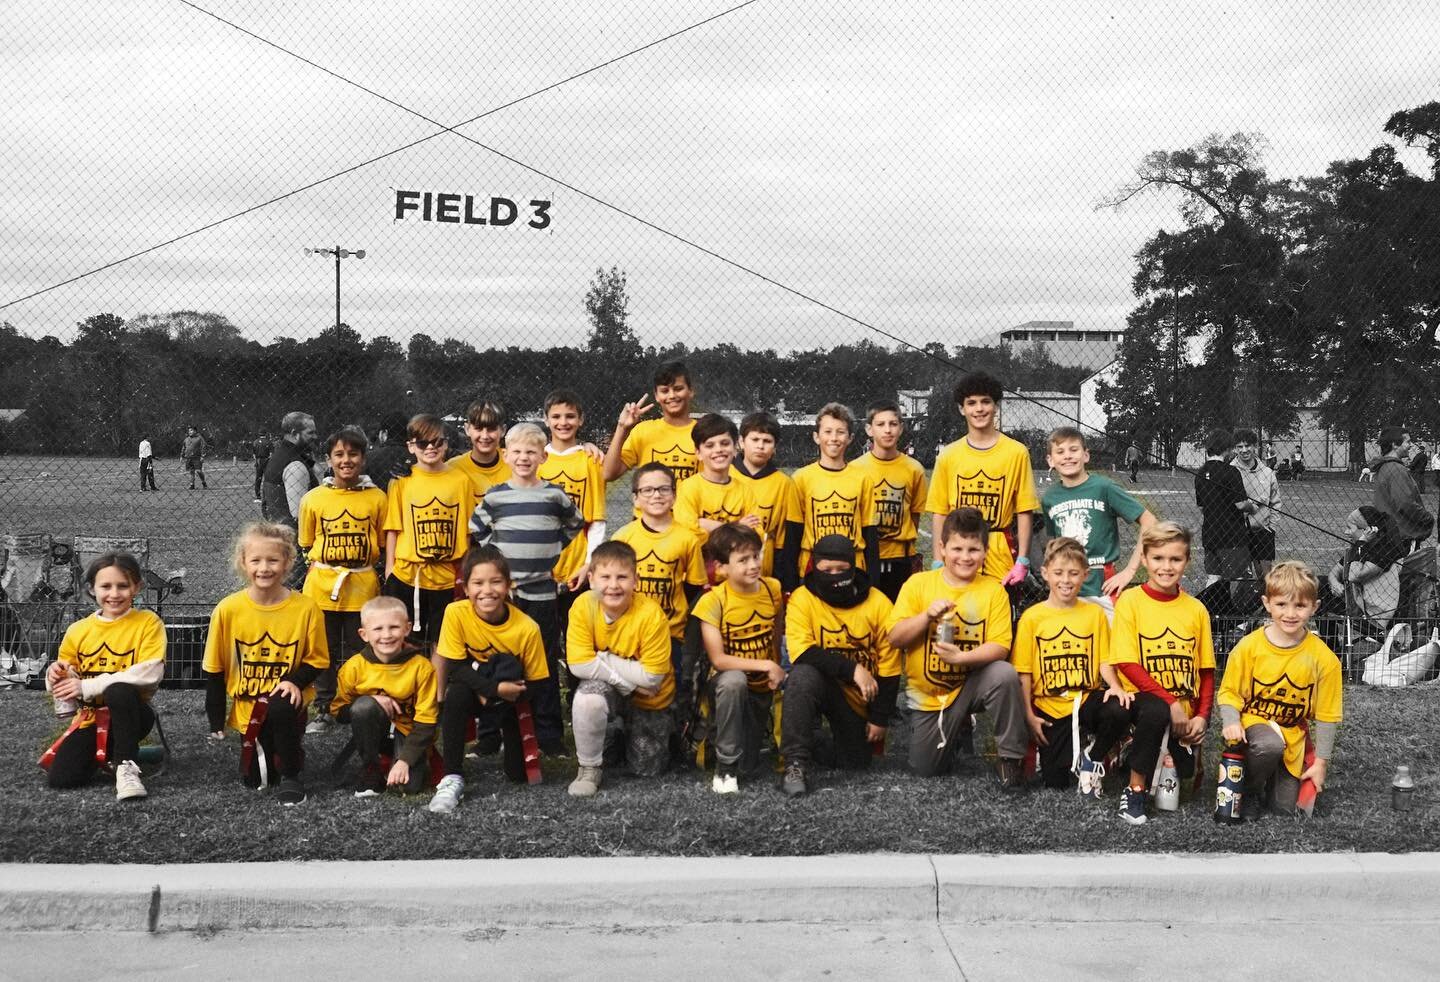 We love your kids!

Here are some who played in yesterday&rsquo;s 11th ANNUAL TURKEY BOWL.

We're thankful for each and every one of them and the their parents who make Project KIDS what it is.

#turkeybowl
#lifeofchurchproject